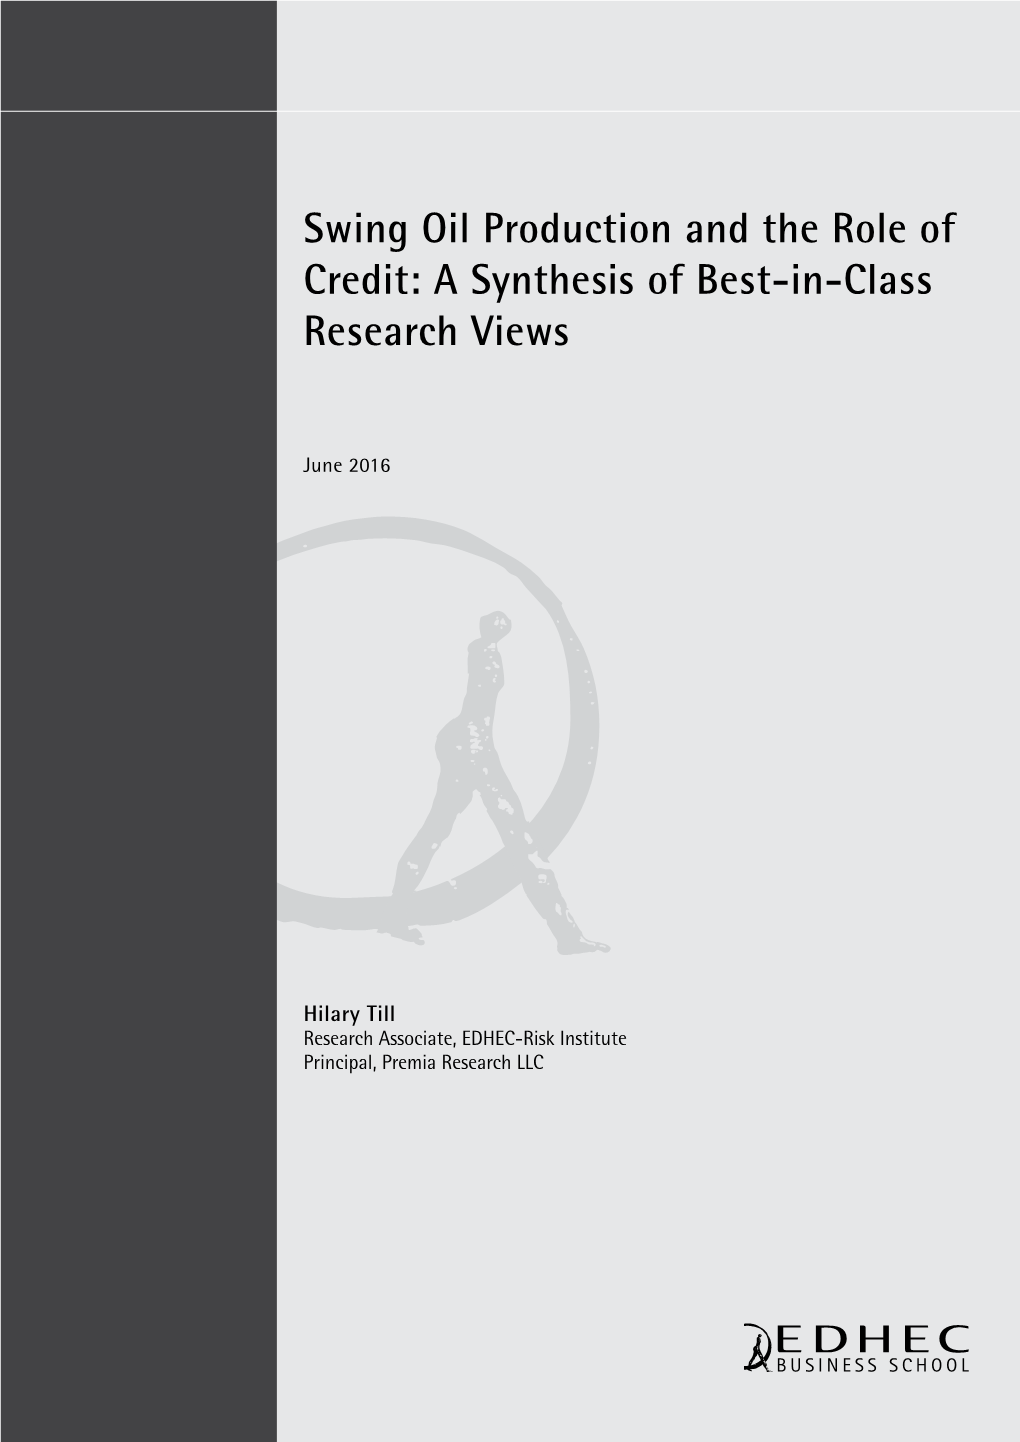 Swing Oil Production and the Role of Credit: a Synthesis of Best-In-Class Research Views